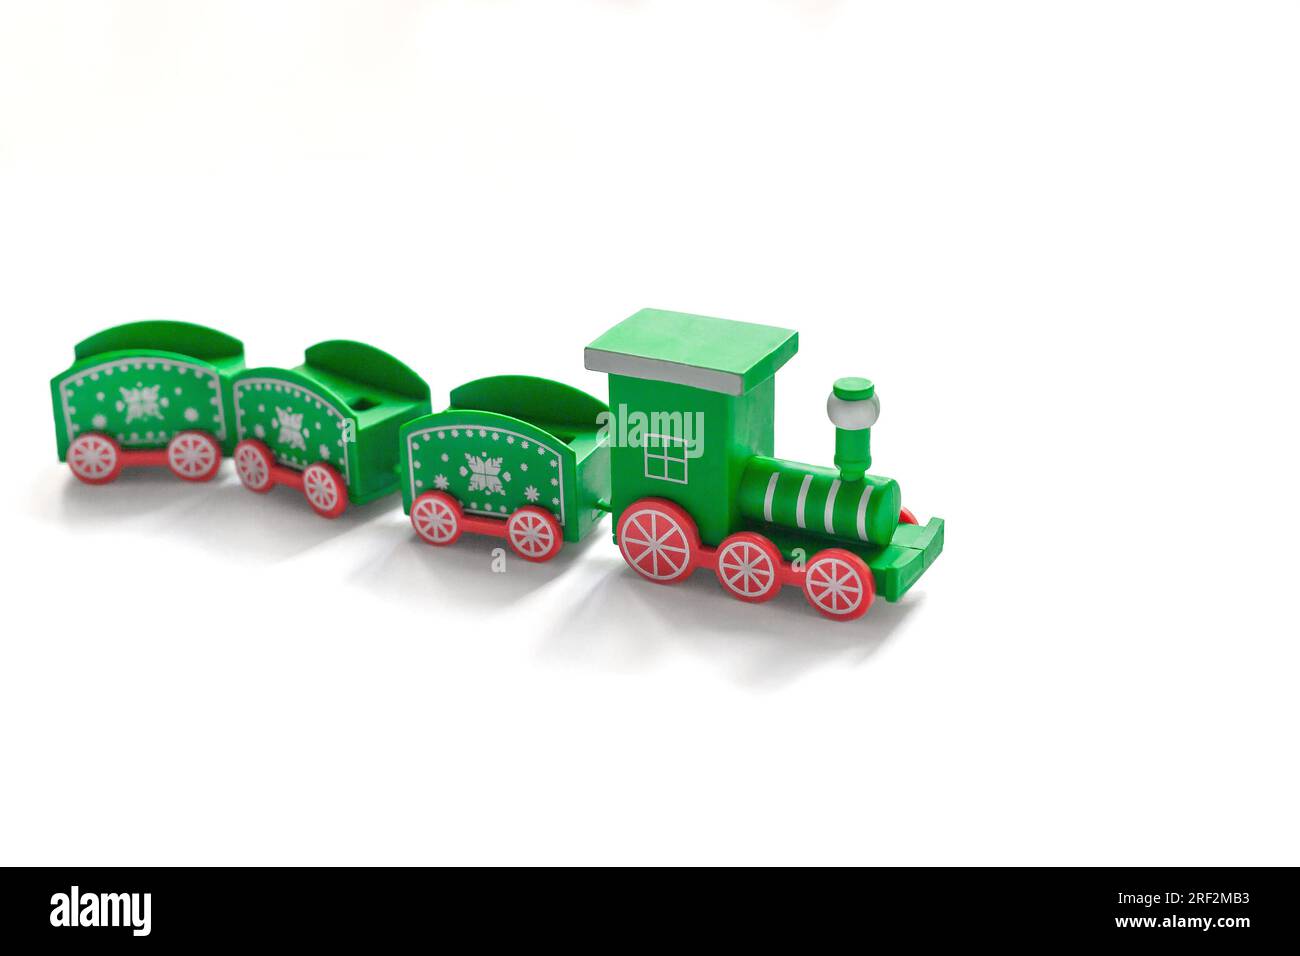 Green Christmas train on a white background. side view. toy Stock Photo